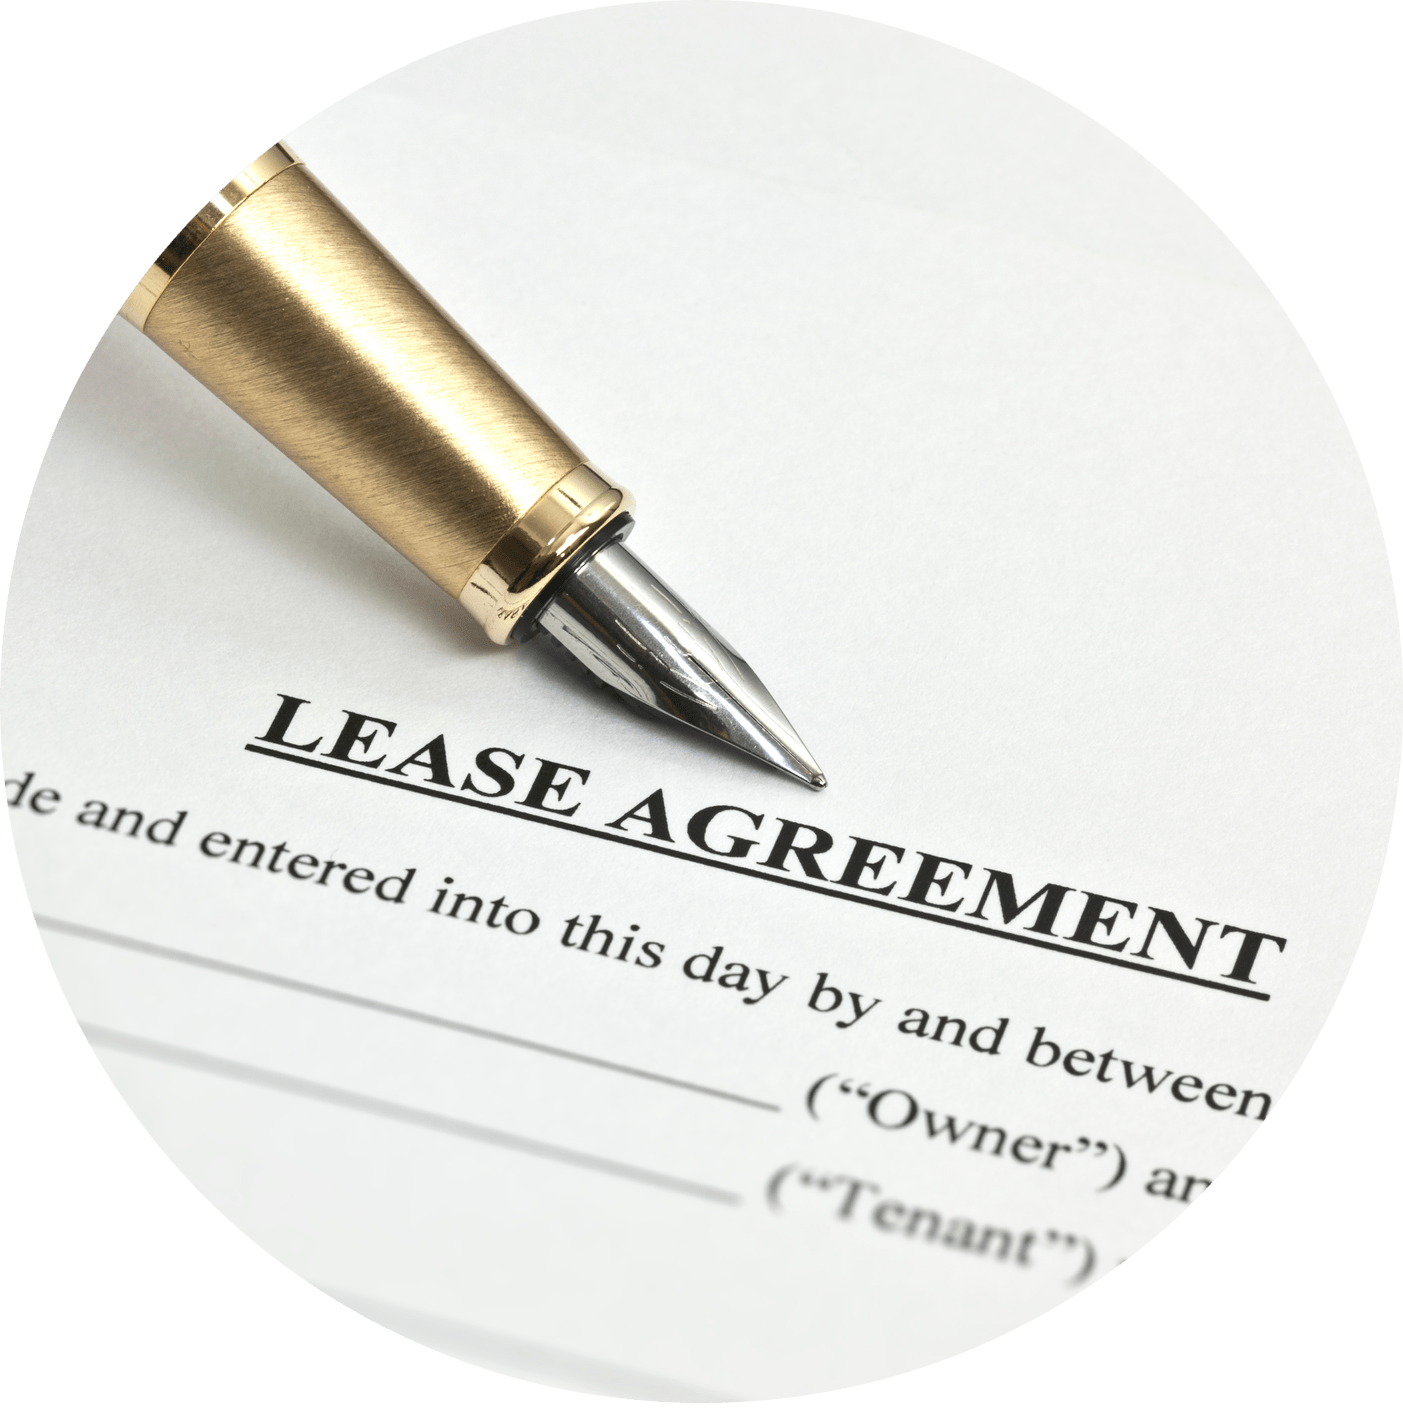 A gold pen on top of a piece of paper with the title "Lease Agreement".